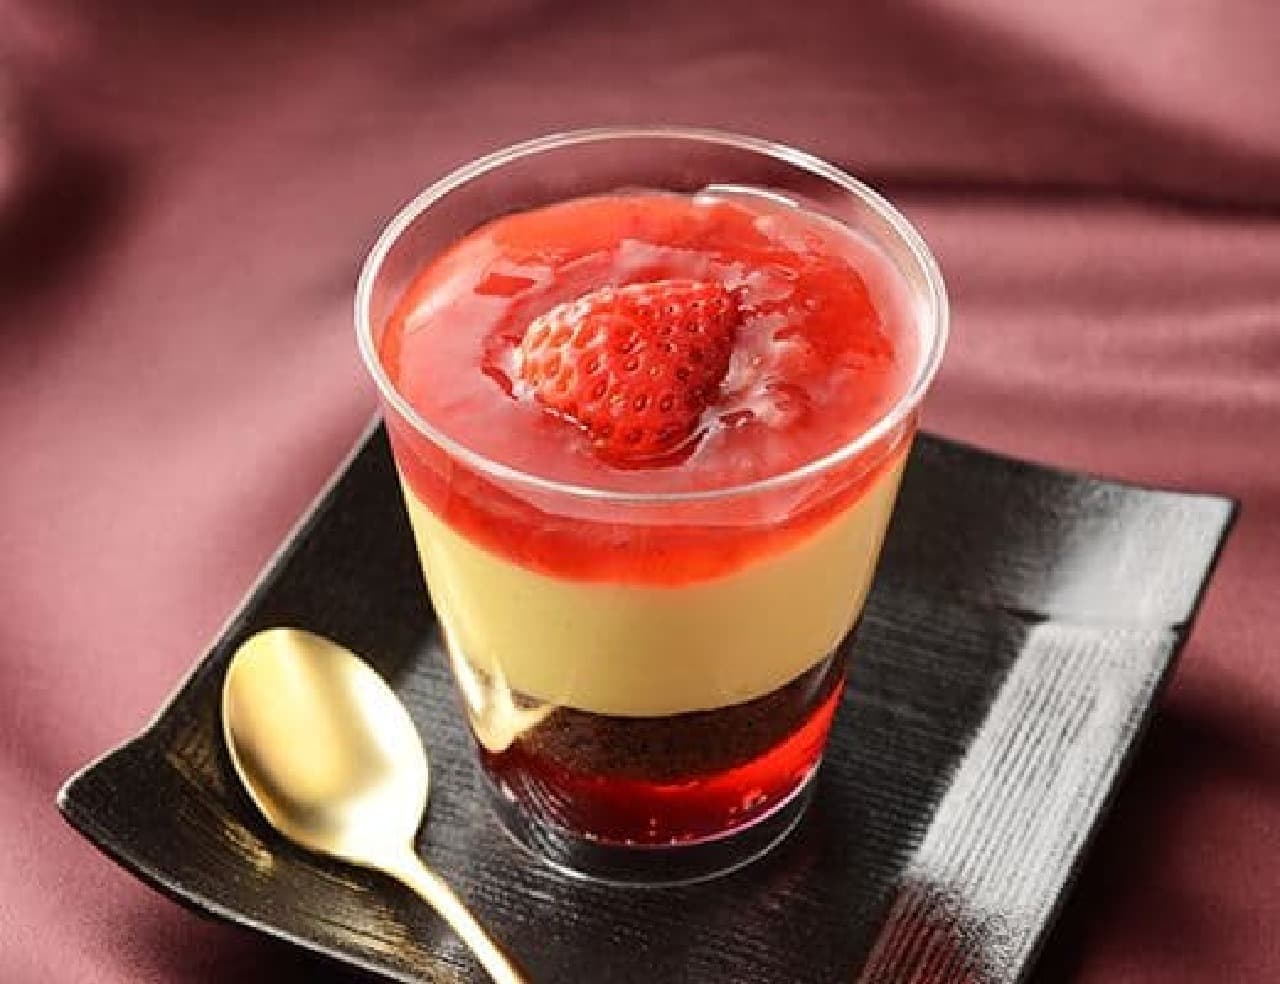 Lawson "Strawberry and Wine-Scented Berry Parfait